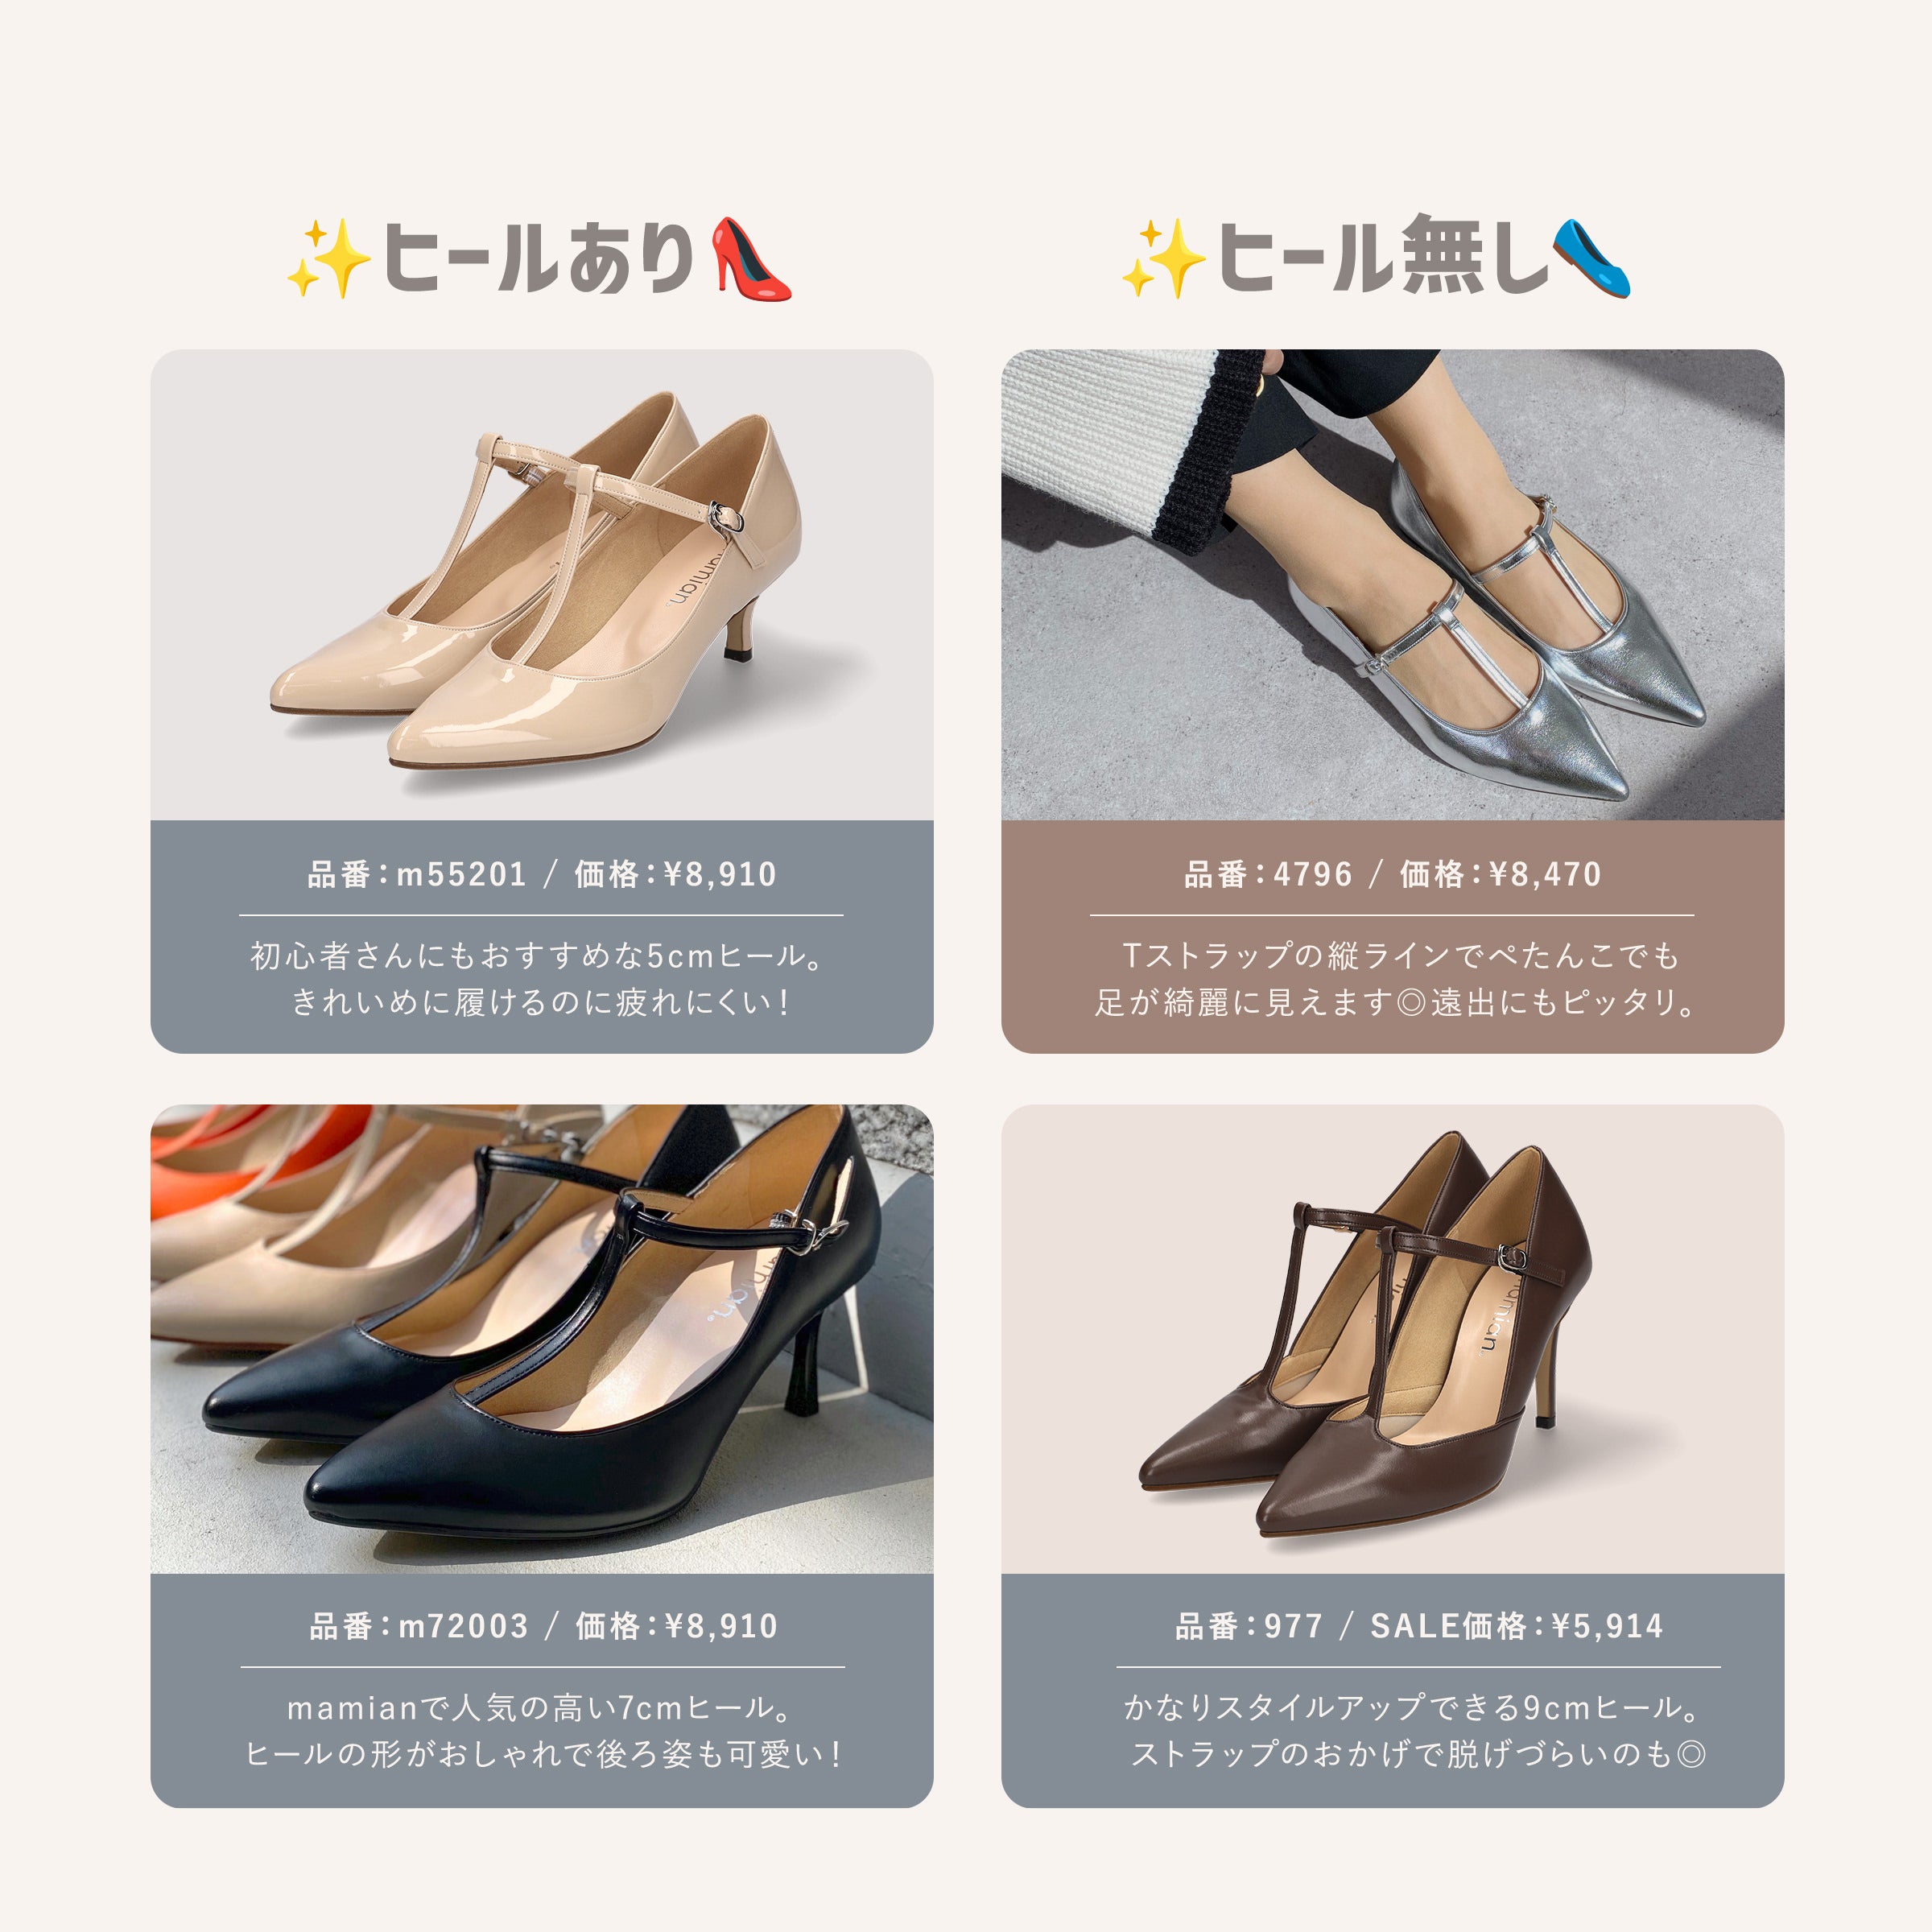 Which would you choose, heels or flats? special feature